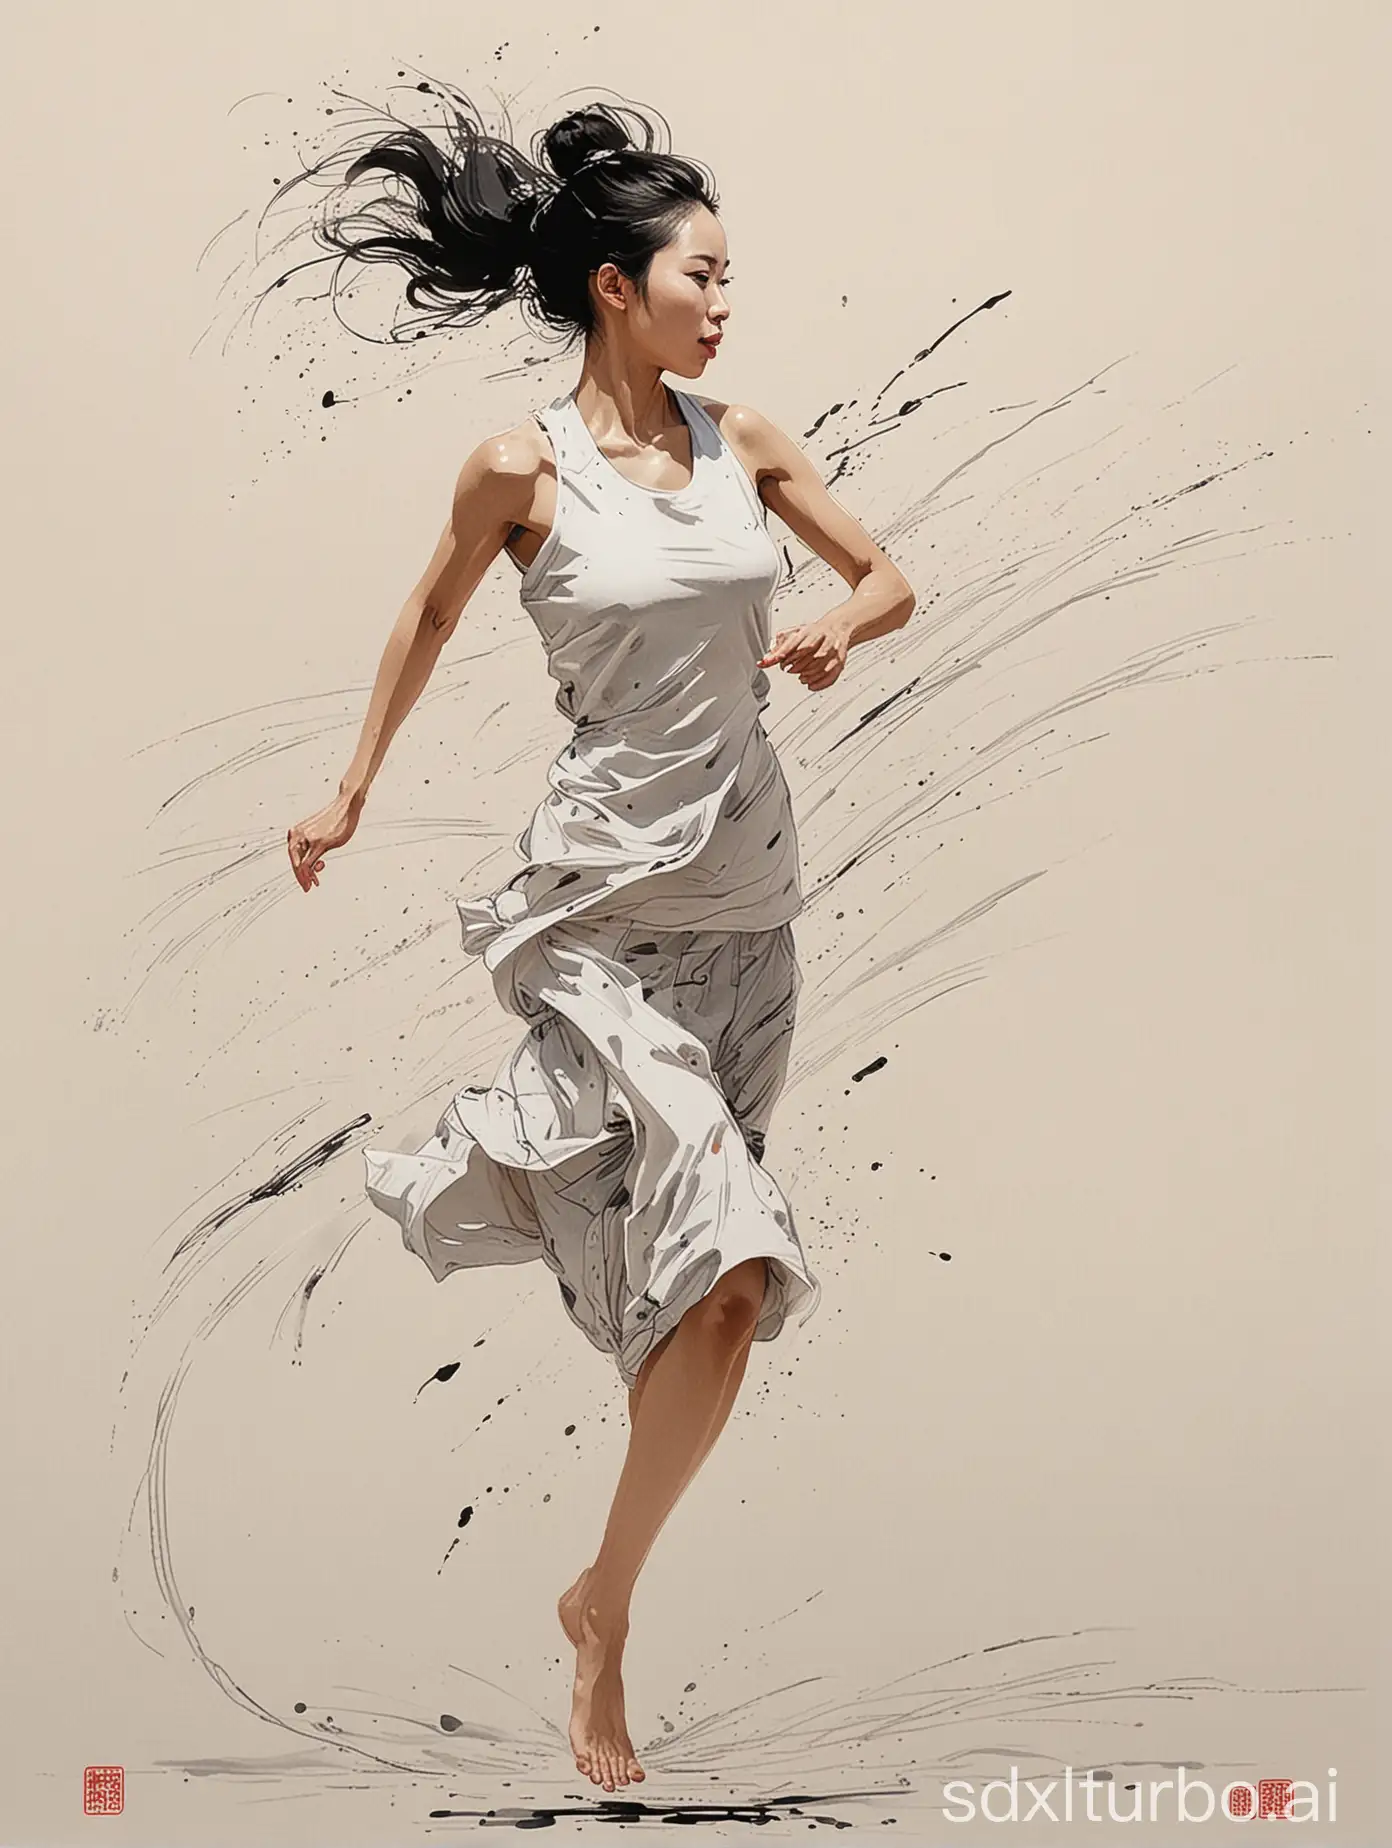 a painting of a simply running woman, high speed, solo, in the style of wu guanzhong, Chinese painting, abstract random ink strokes,  abstract lines, energetic brush strokes